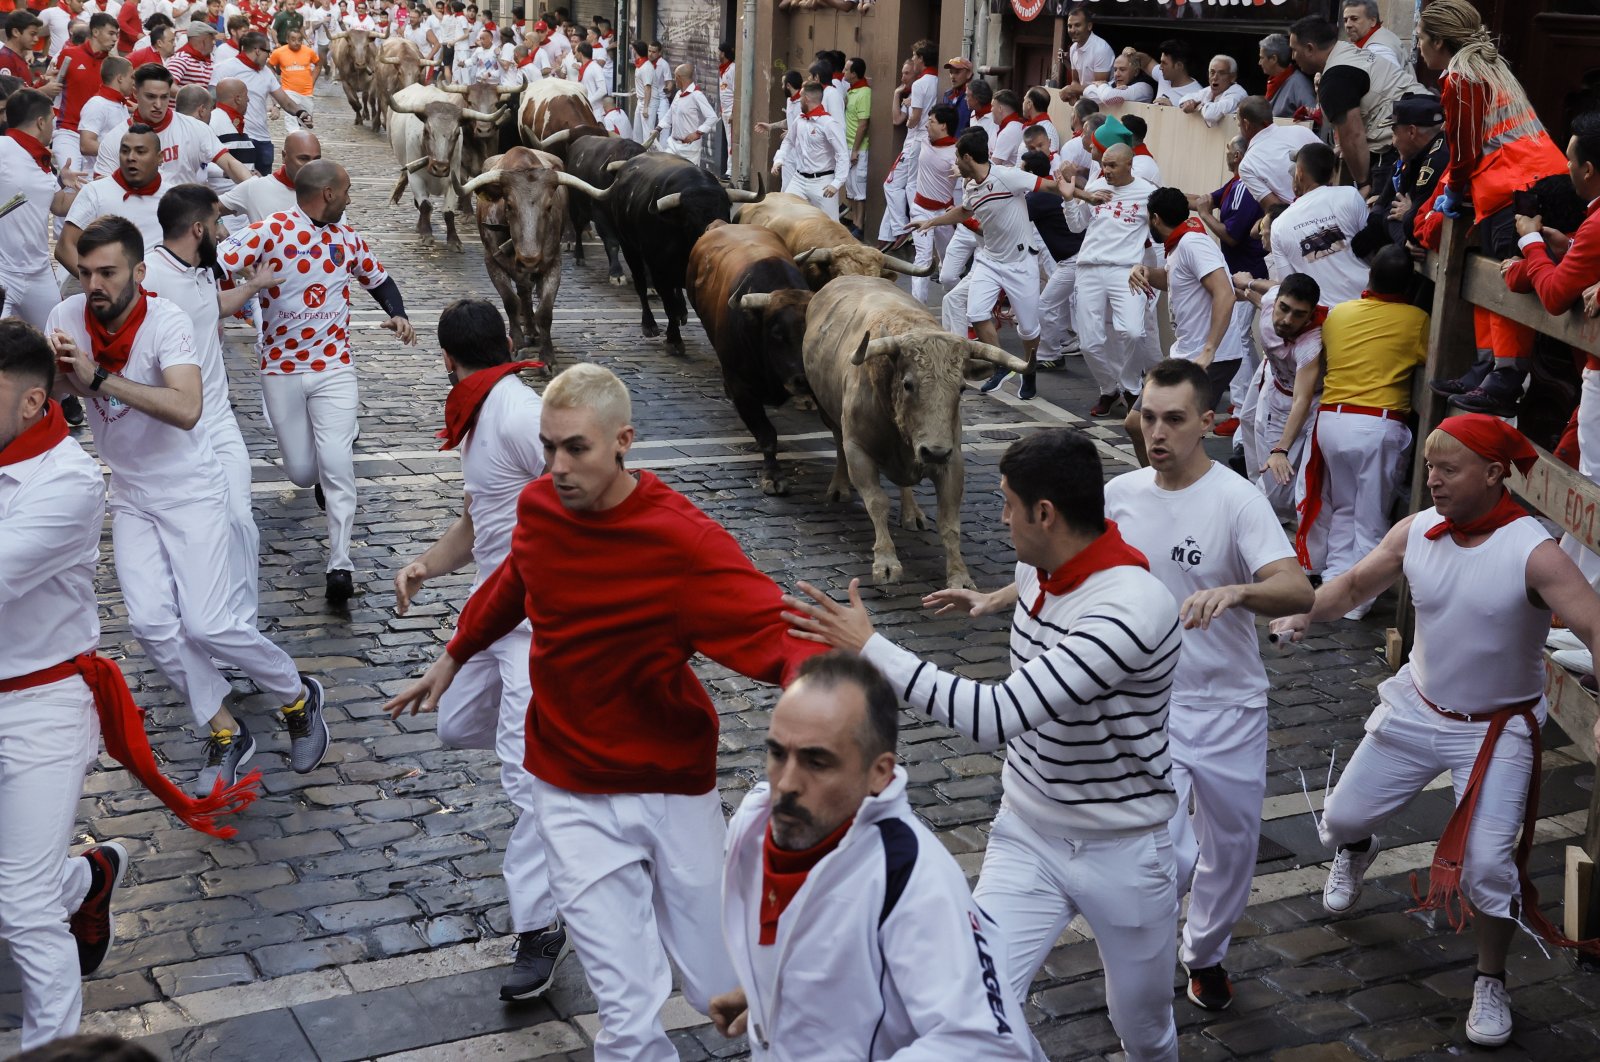 People take part in the traditional Running of the Bulls, Pamplona, Spain, July 7, 2022. (EPA Photo)